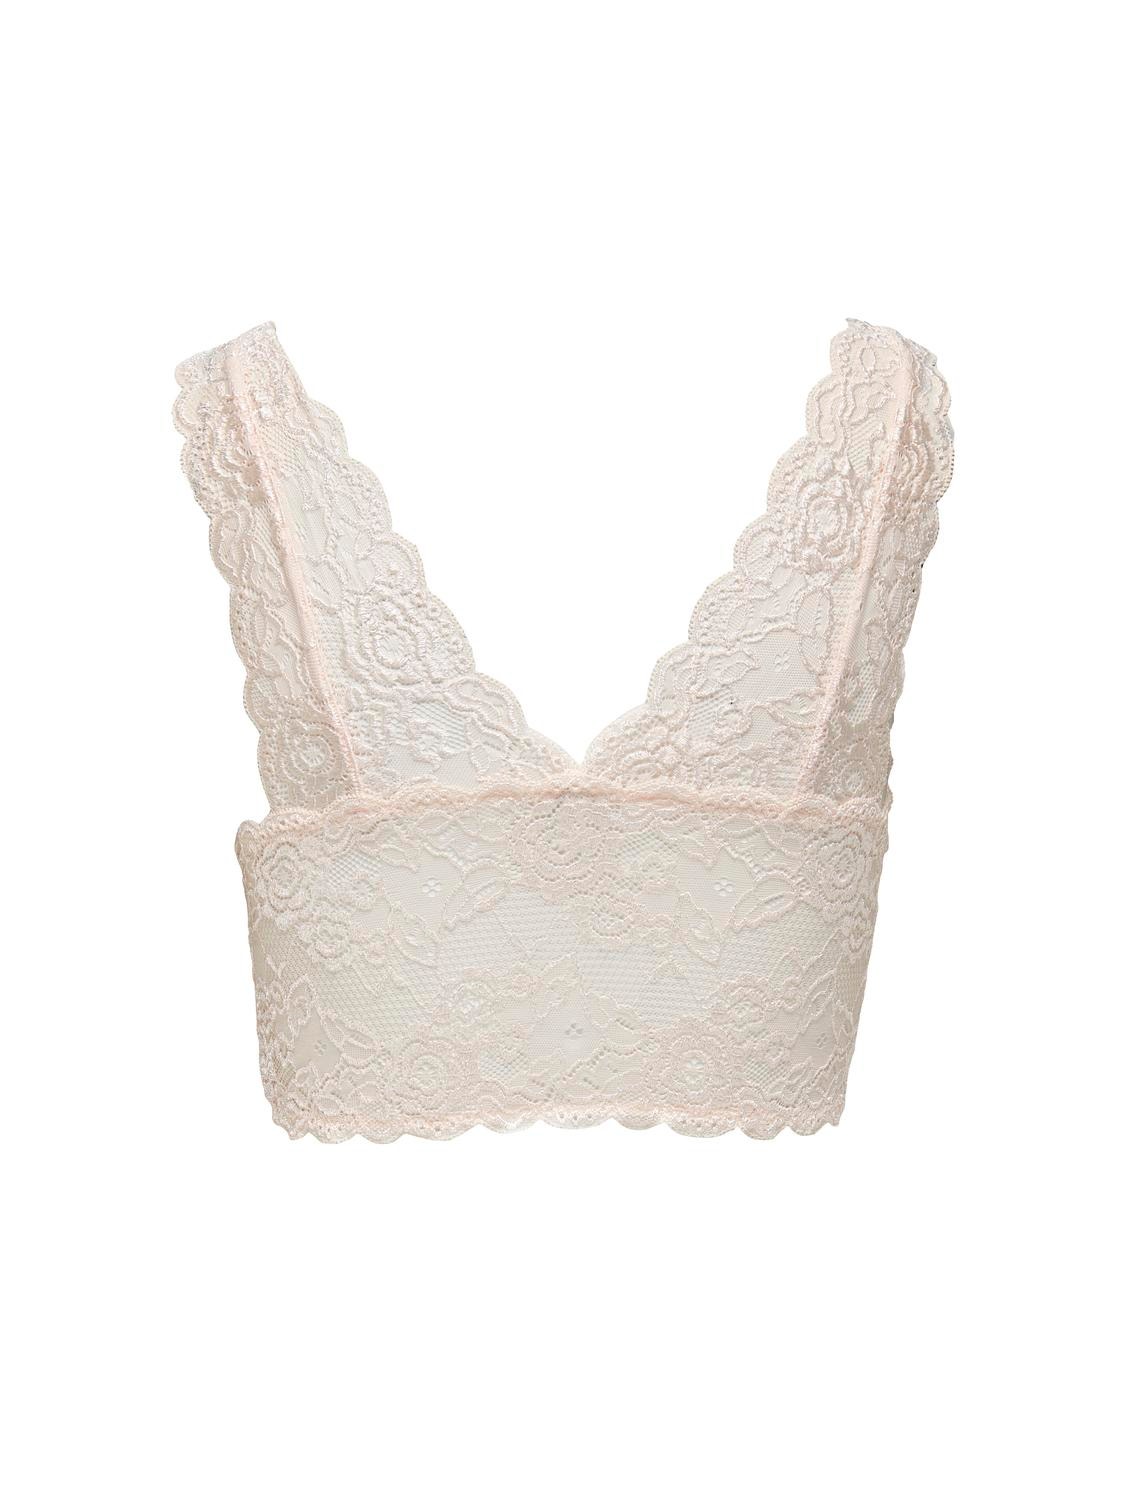 ONLY Lace Bra -Pearl - 15107599